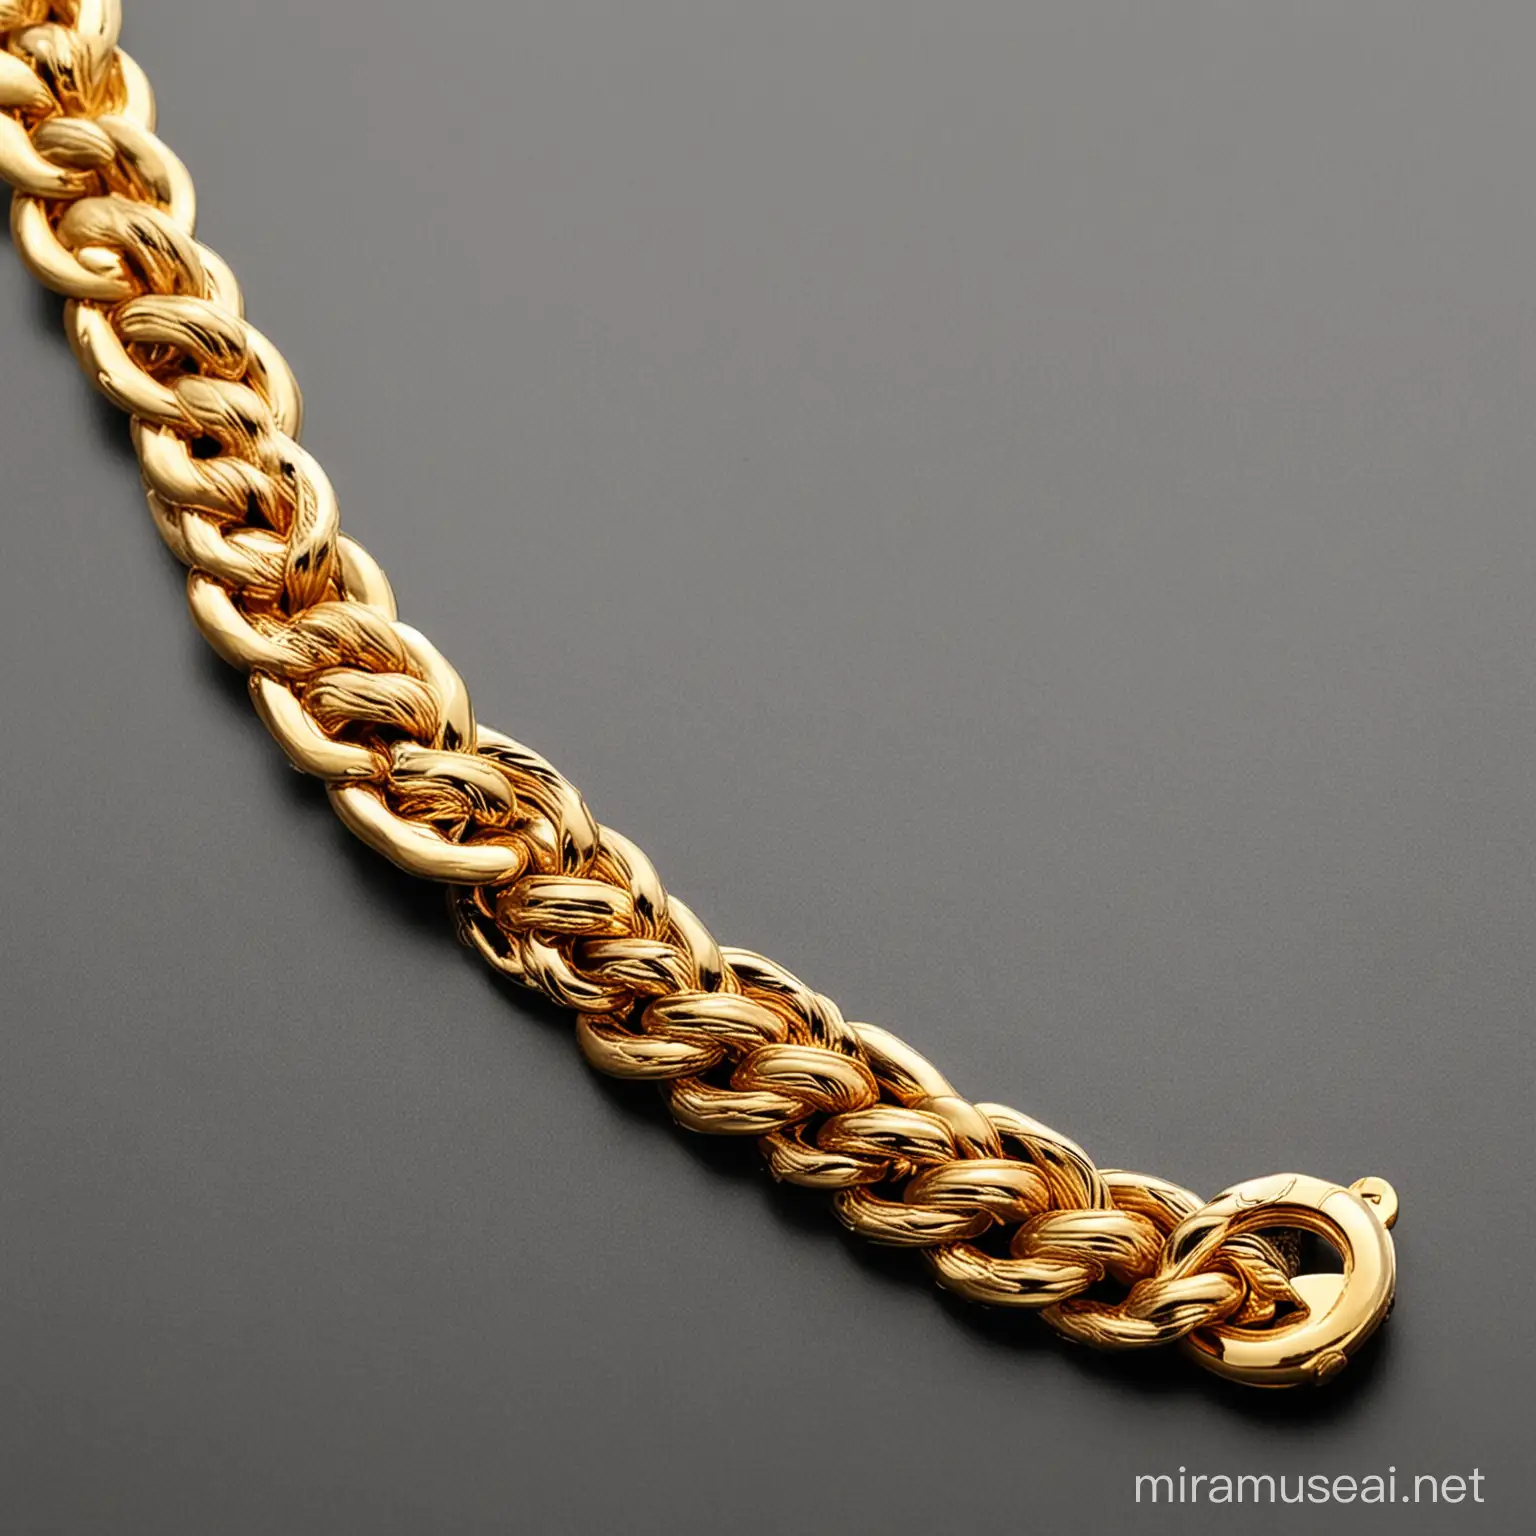 Exquisite Golden Chain Jewelry Luxurious Accessories for Elegance